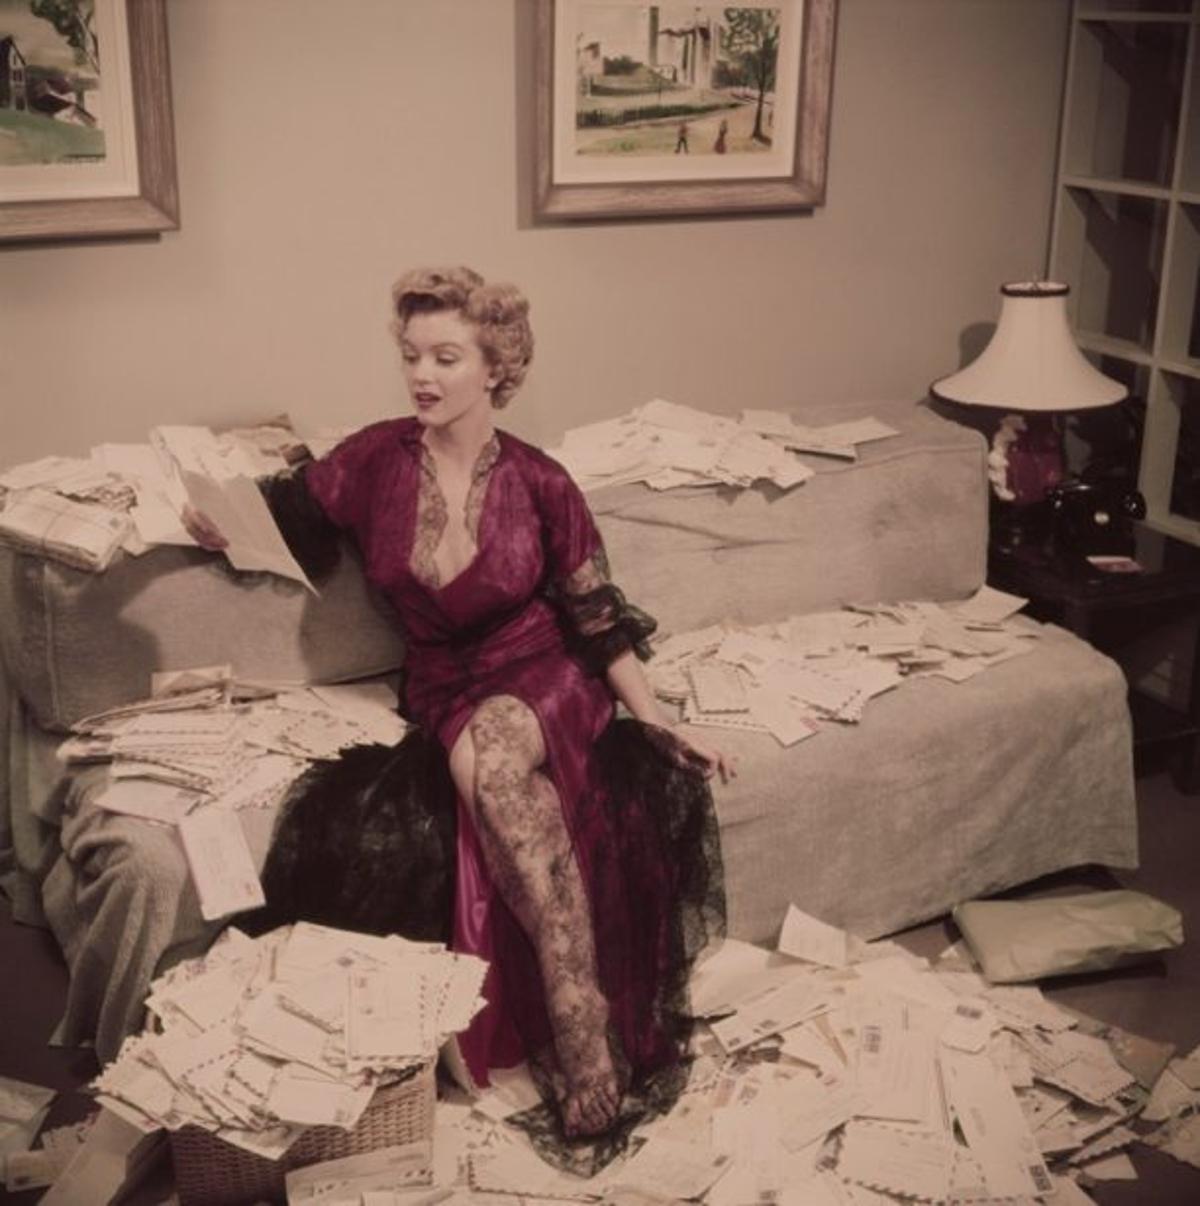 Fan Mail 
1952
by Slim Aarons

printed 2023
Slim Aarons Limited Estate Edition

Marilyn Monroe (1926 – 1962), wearing a red negligee trimmed with black lace, sorts out her fan mail shortly after her film ‘The Asphalt Jungle’ had been released,